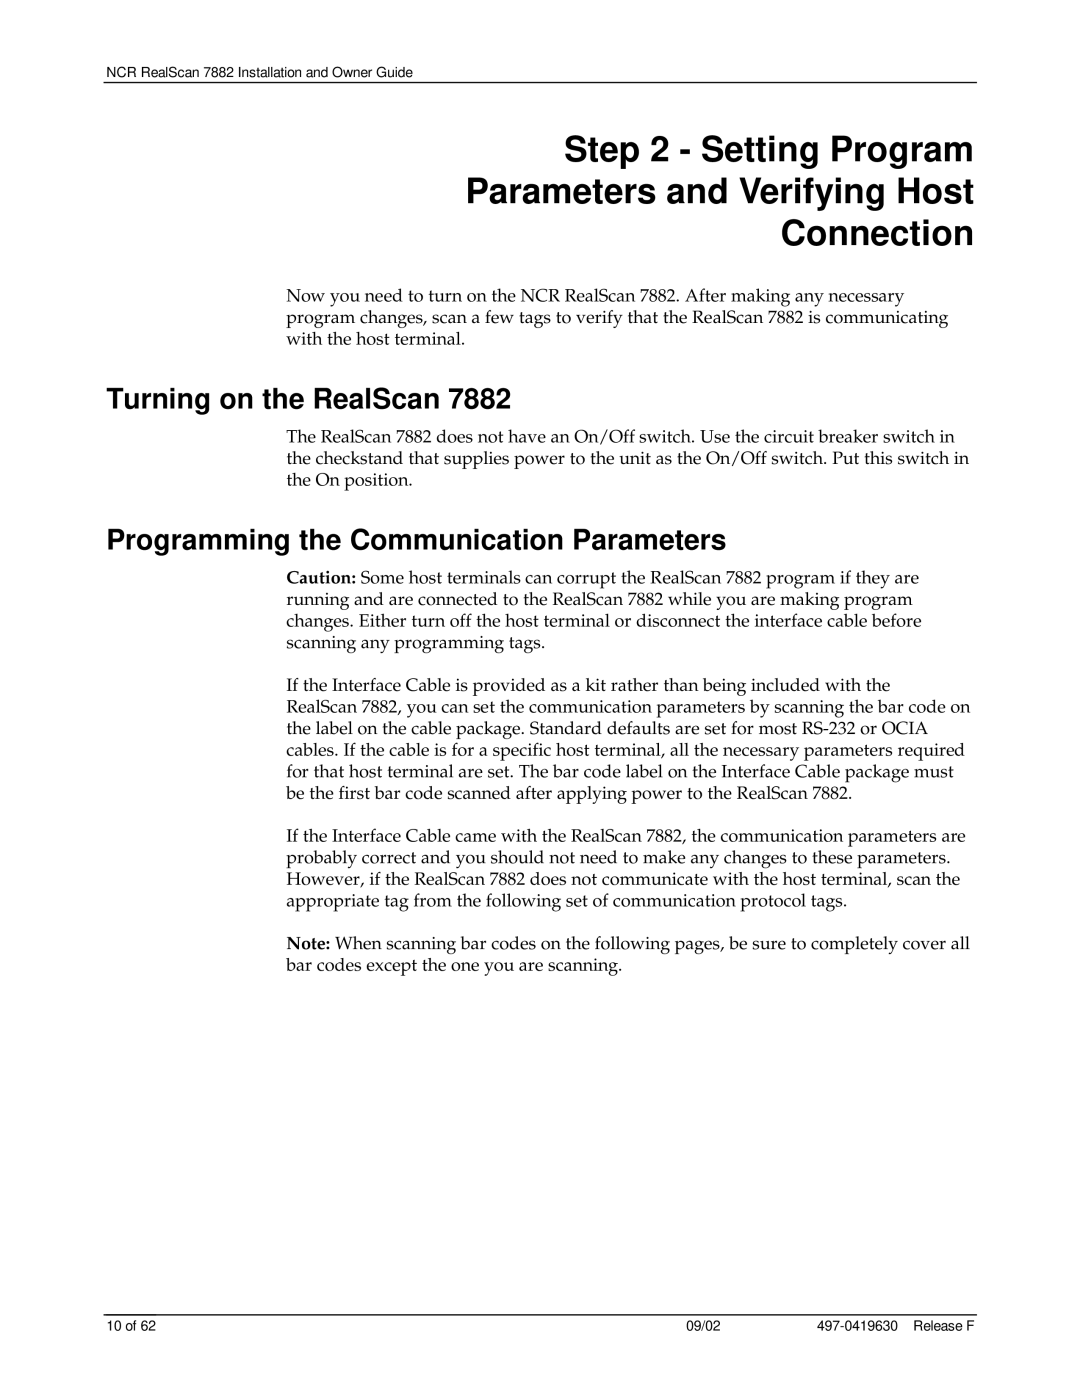 NCR 7882 manual Setting Program Parameters and Verifying Host Connection, Turning on the RealScan 